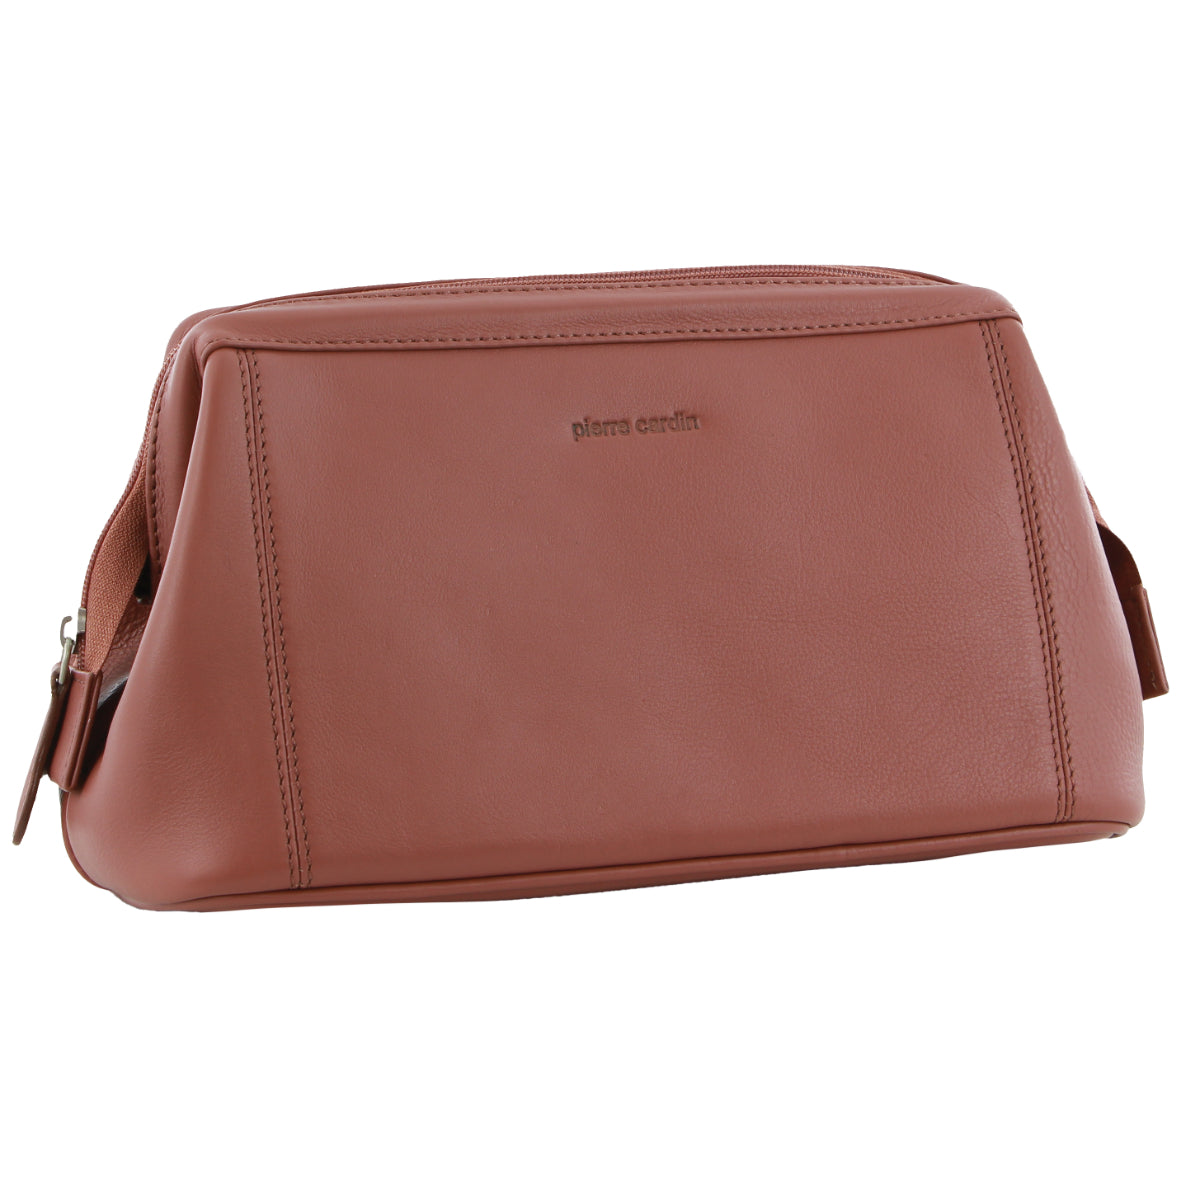 Pierre Cardin Rustic Leather Toiletry Bag in Rose